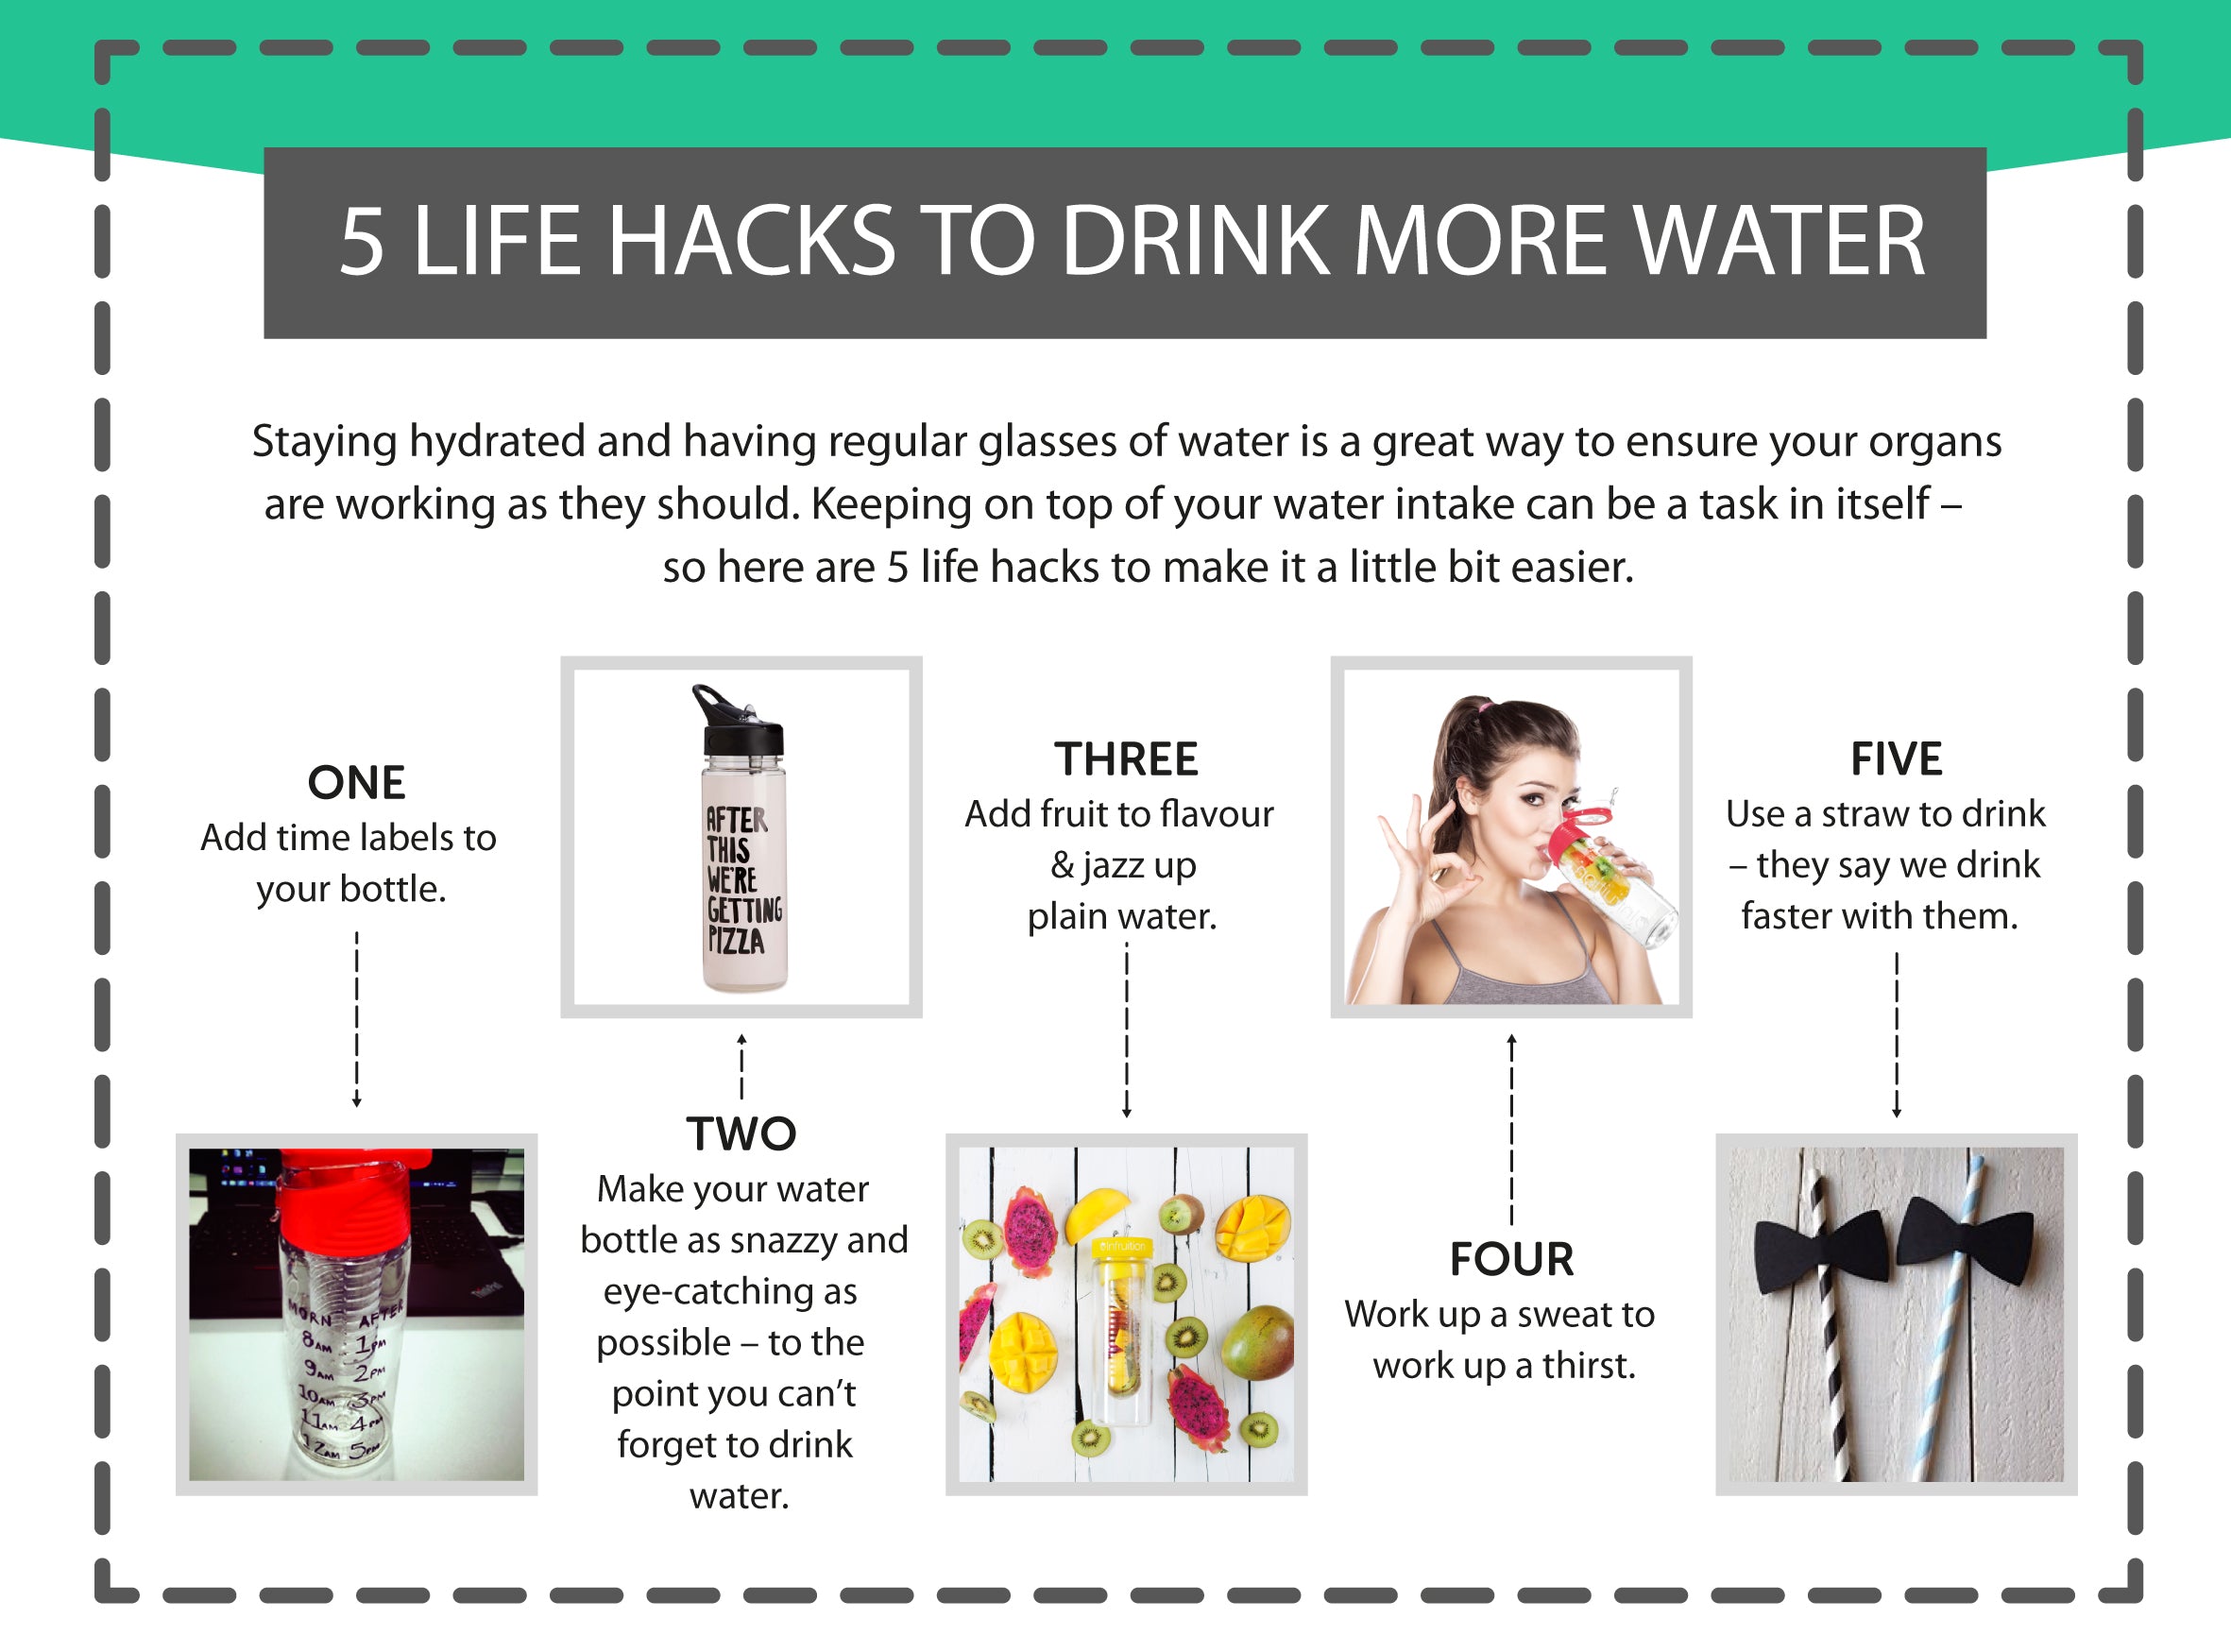 5 Life Hacks to Drink More Water